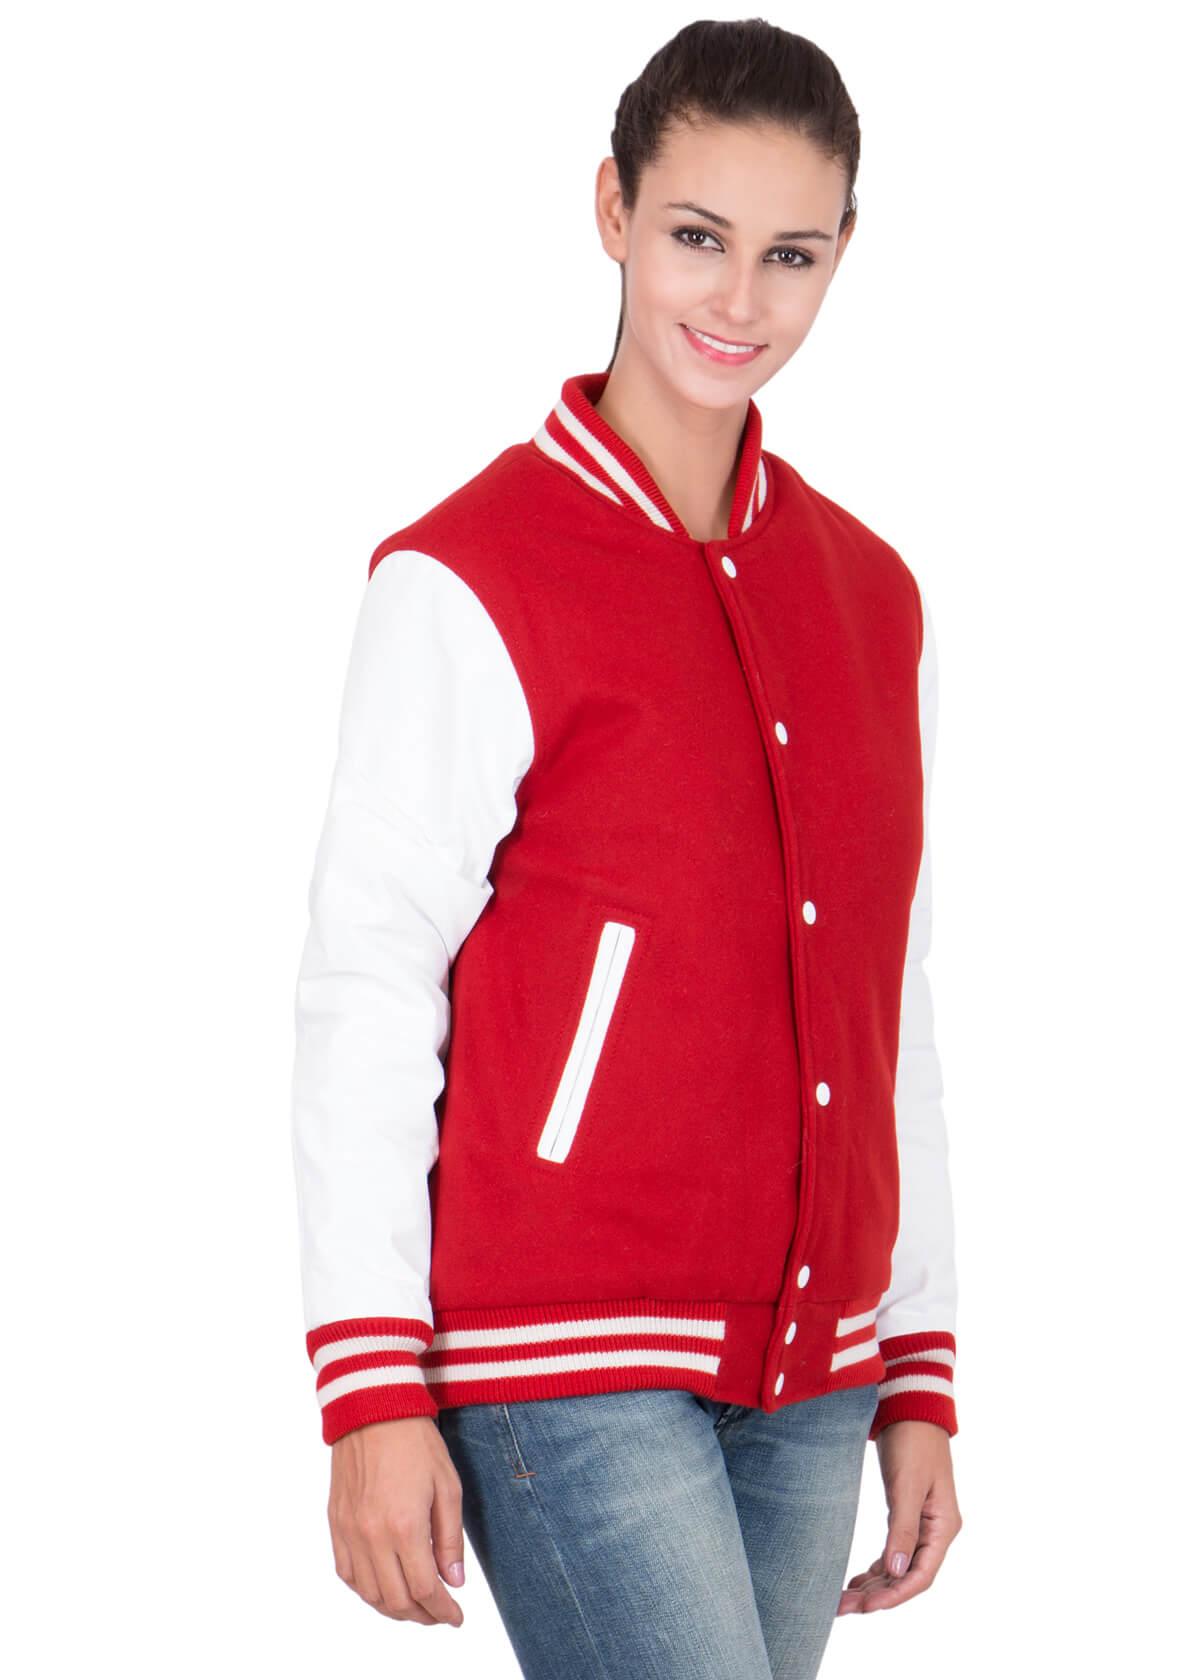 Womens Red and White Letterman Jacket | Varsity Jackets In Europe